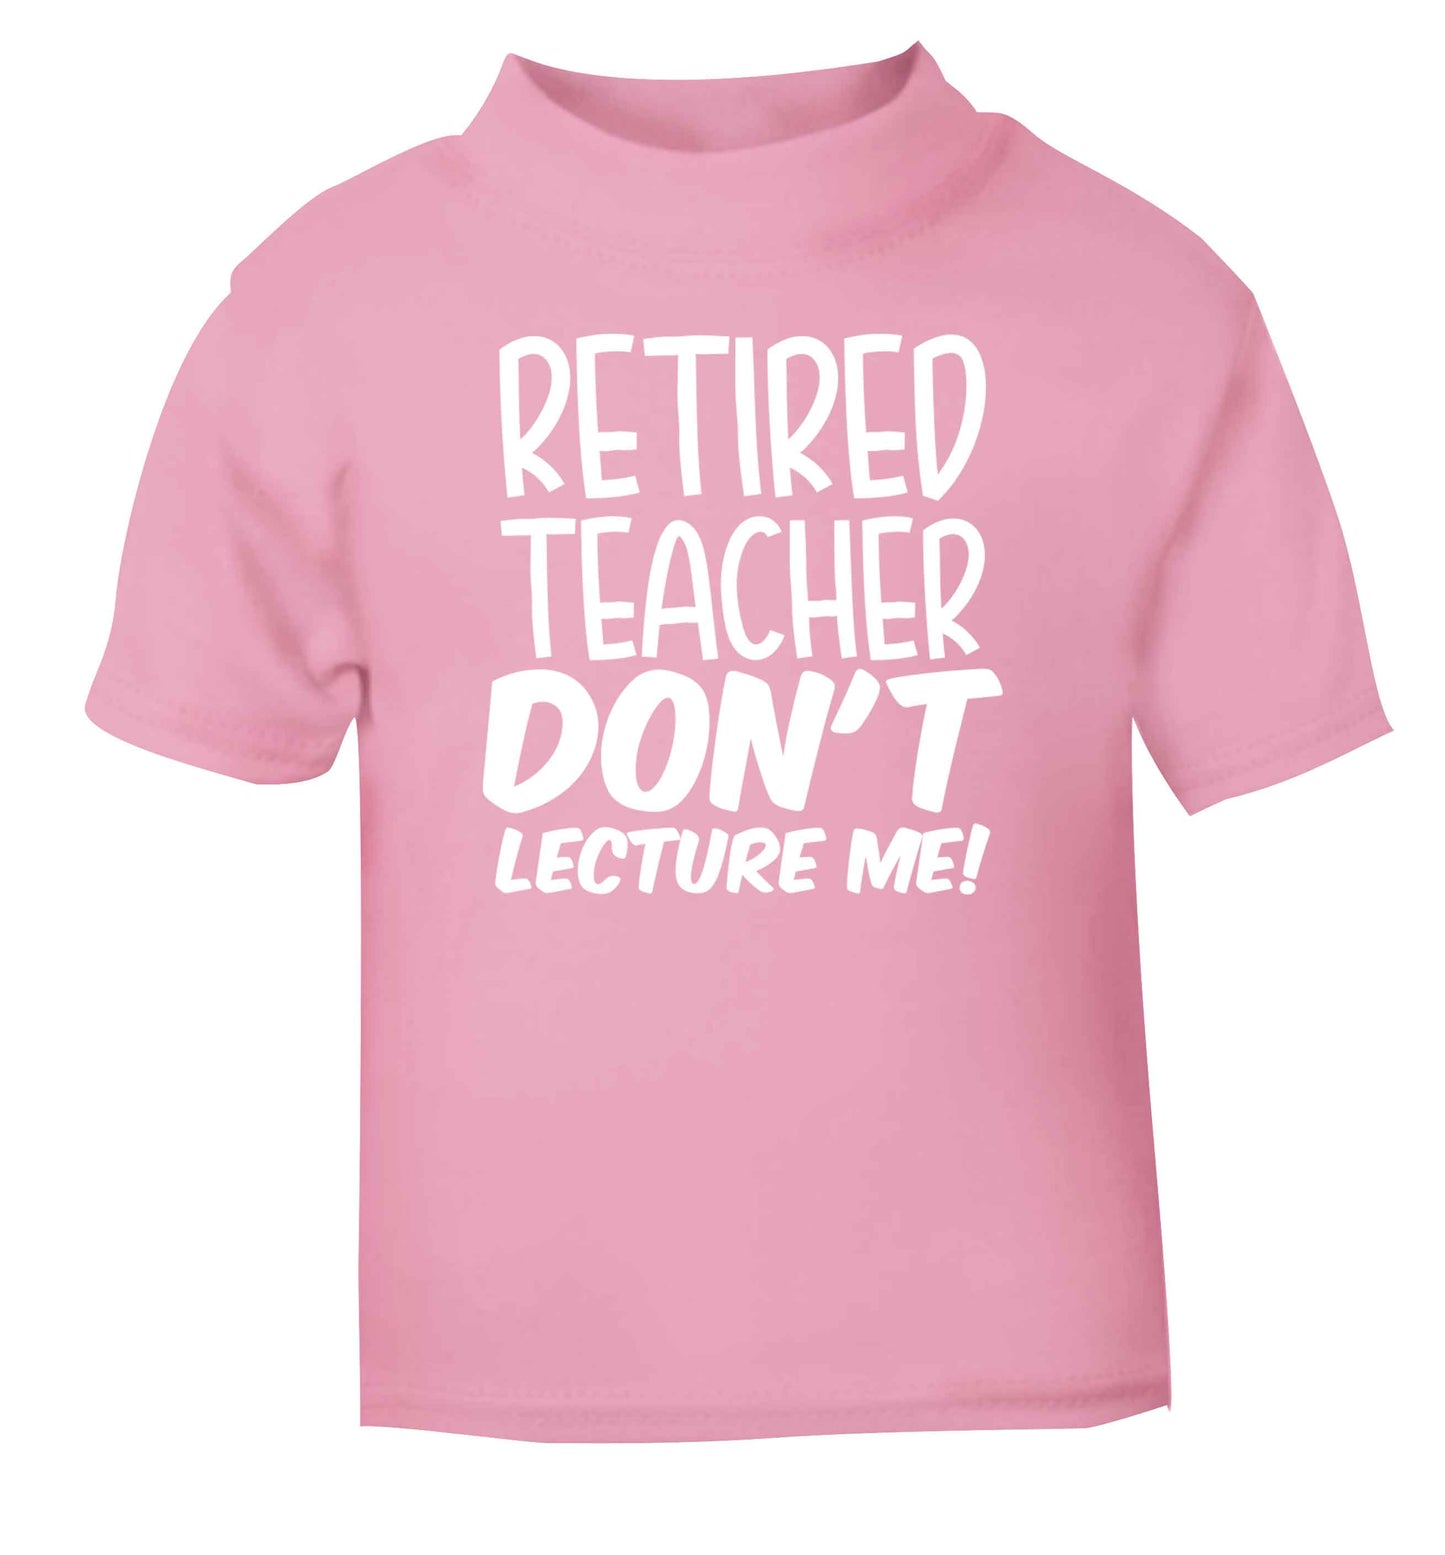 Retired teacher don't lecture me! light pink Baby Toddler Tshirt 2 Years